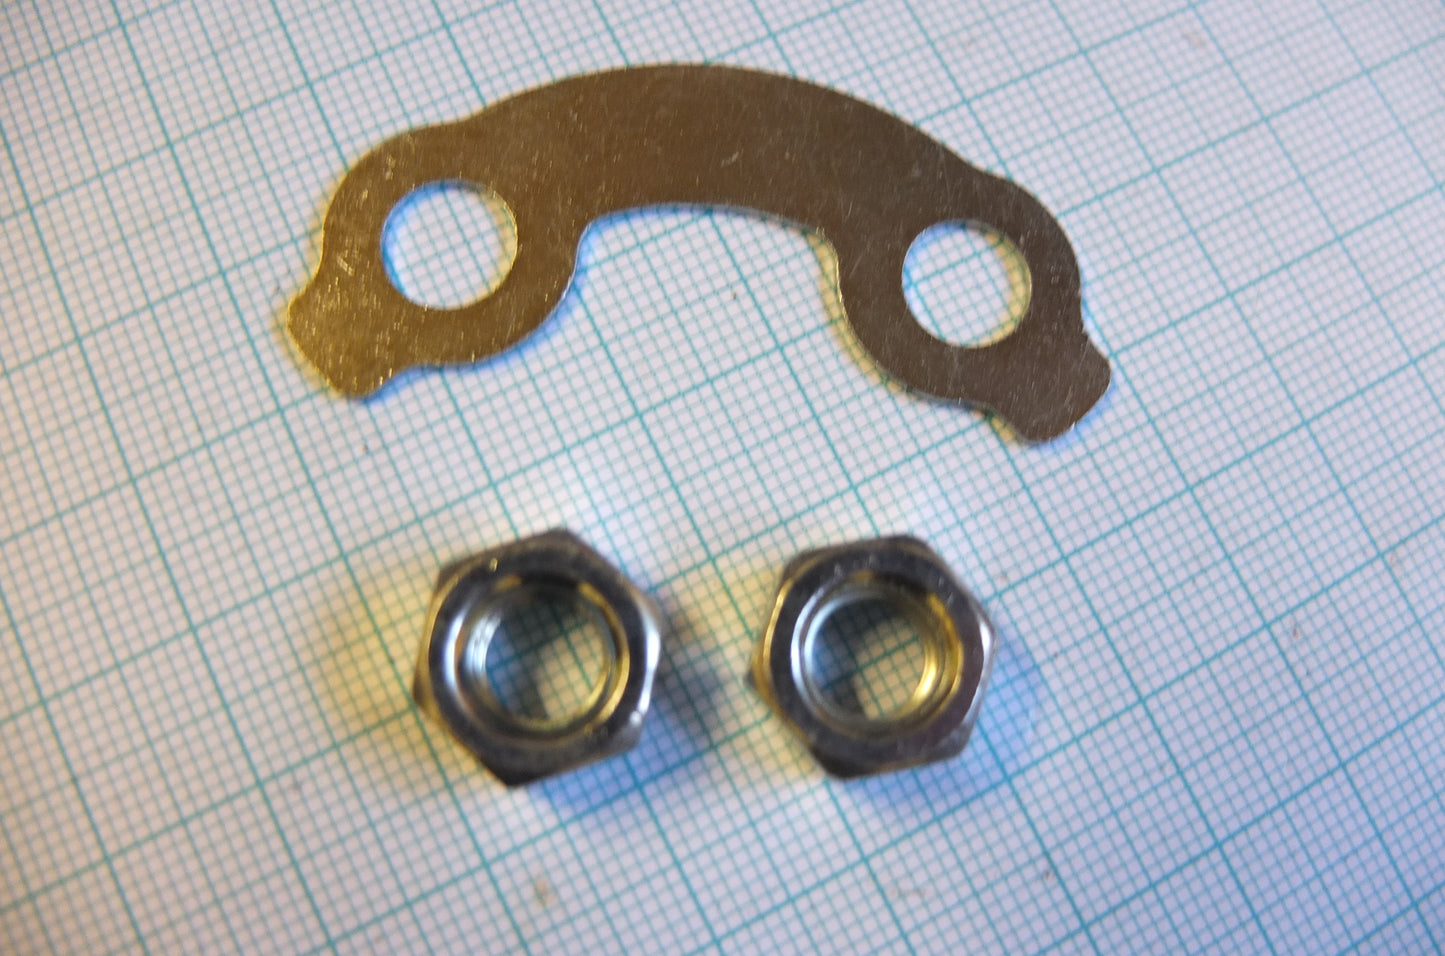 P8/019 Tab washer + nuts